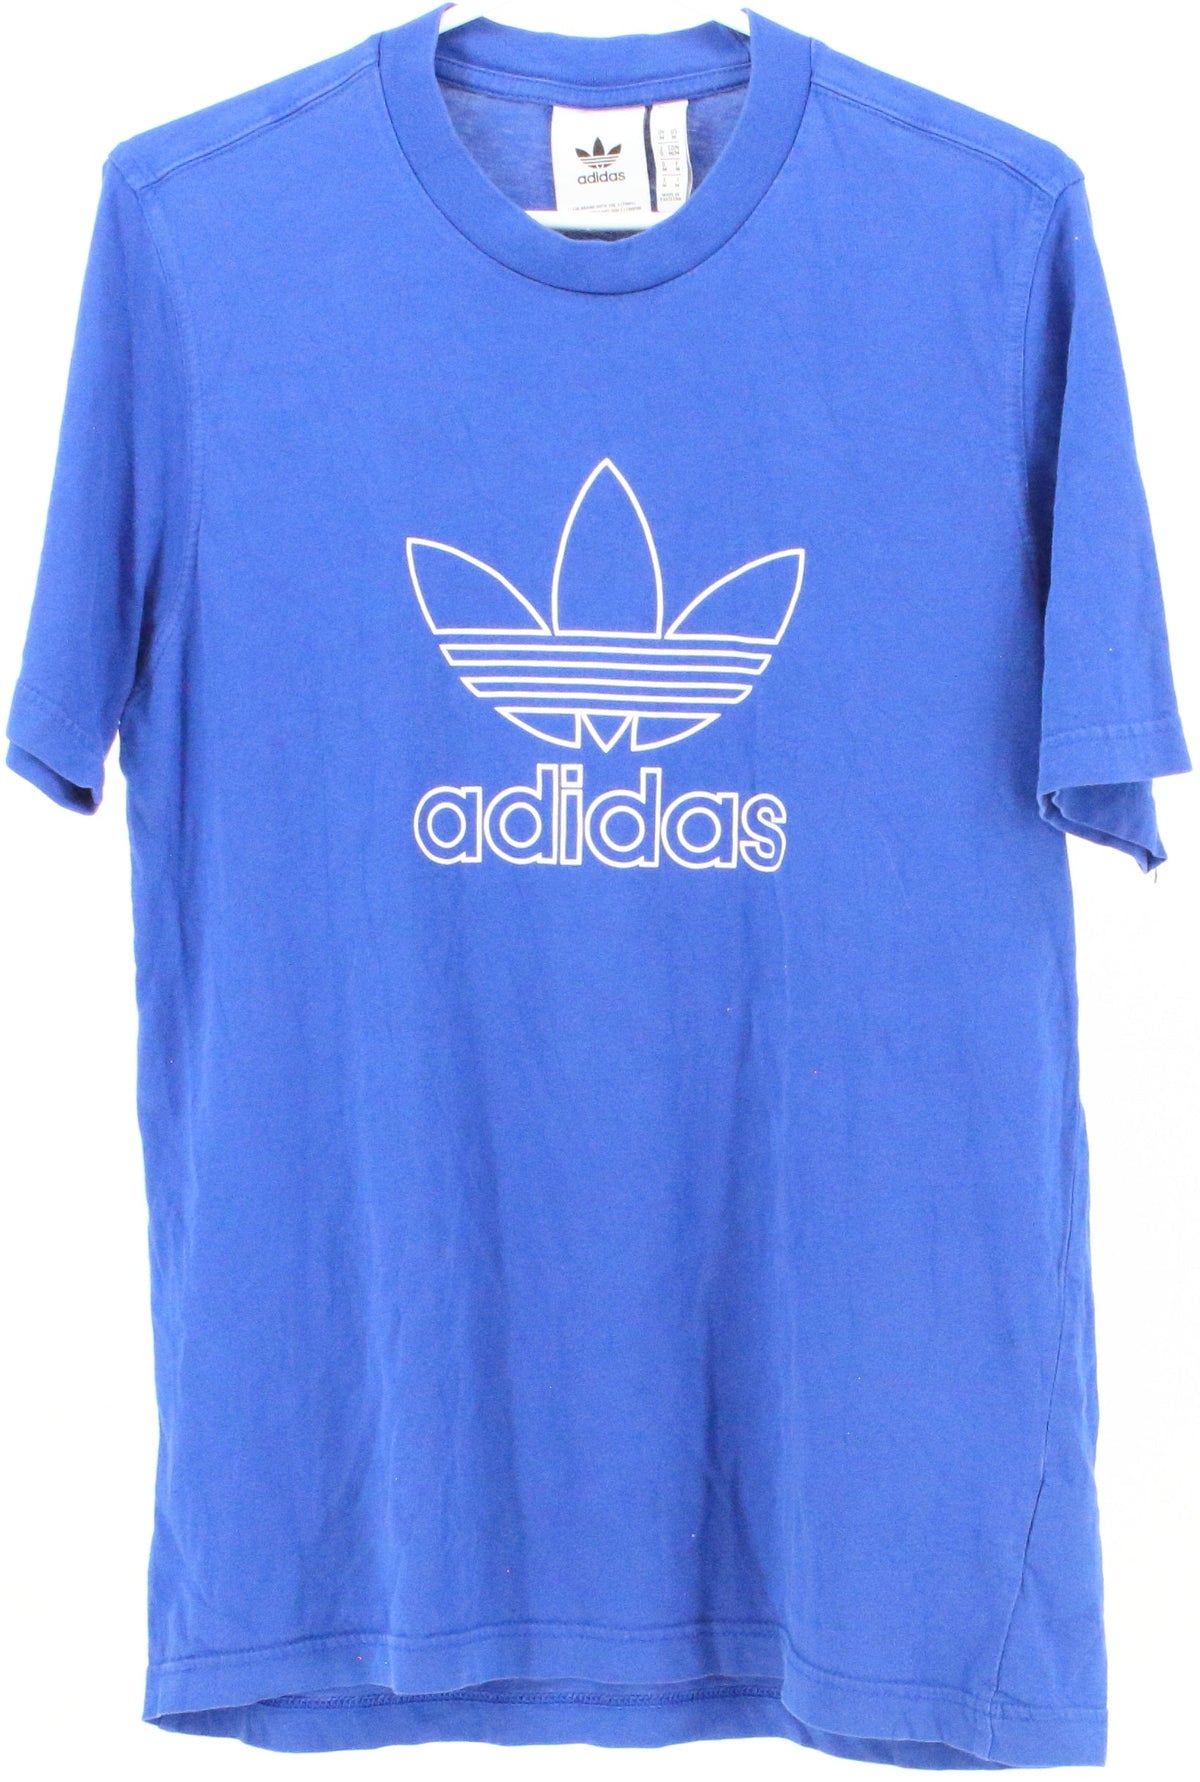 Adidas Blue T-Shirt With White Front Silk Logo Print